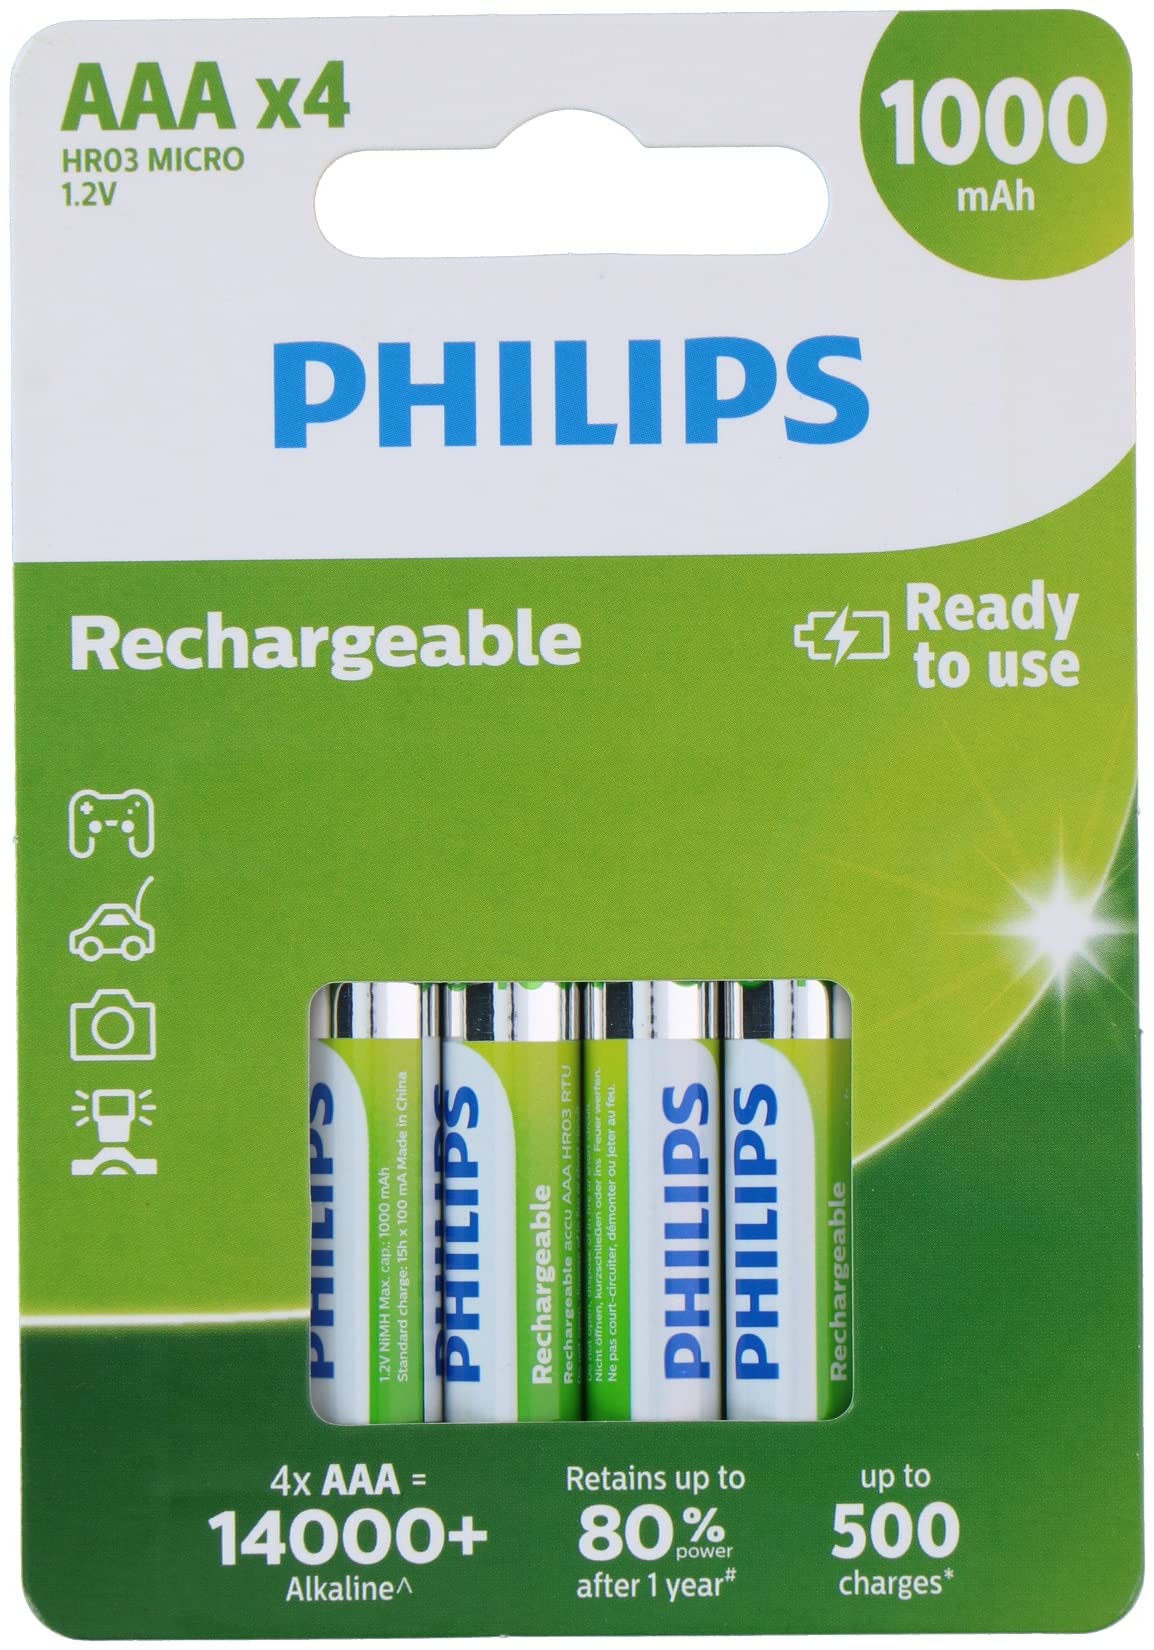 PHILIPS AAA Batteries - HR03 Rechargeable Batteries - NiMH 1.2V - 500 Recharges